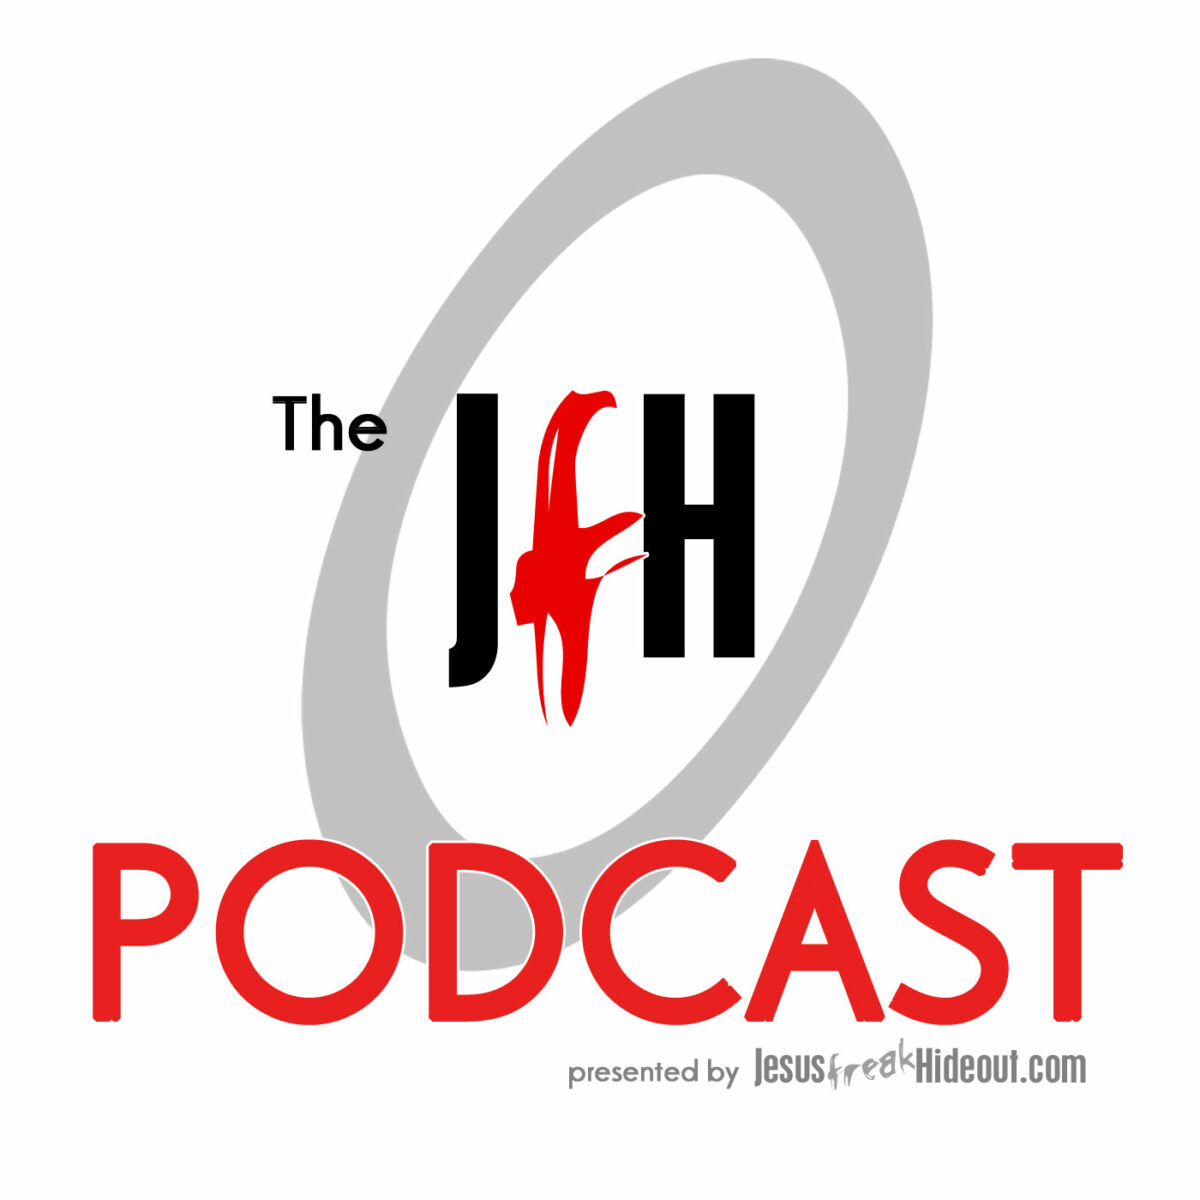 The JFH Podcast 202: 202: 11 Years of Hot Takes (feat. JFH's Scott Fryberger, Josh Balogh, and Evan Dickens)